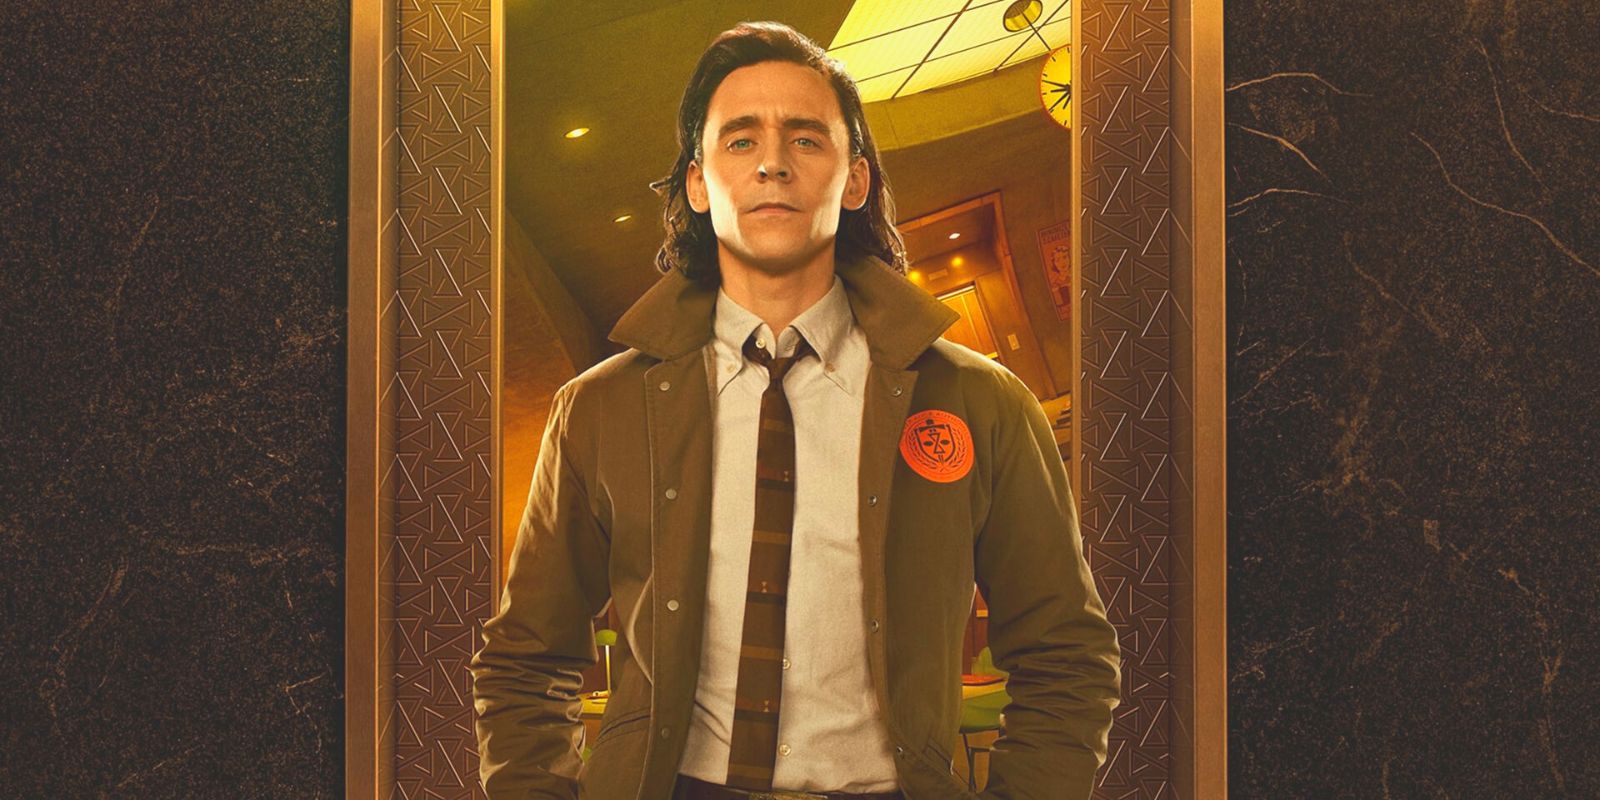 Loki, played by Tom Hiddleston, is standing in a doorway, showing off his tie and TVA jacket